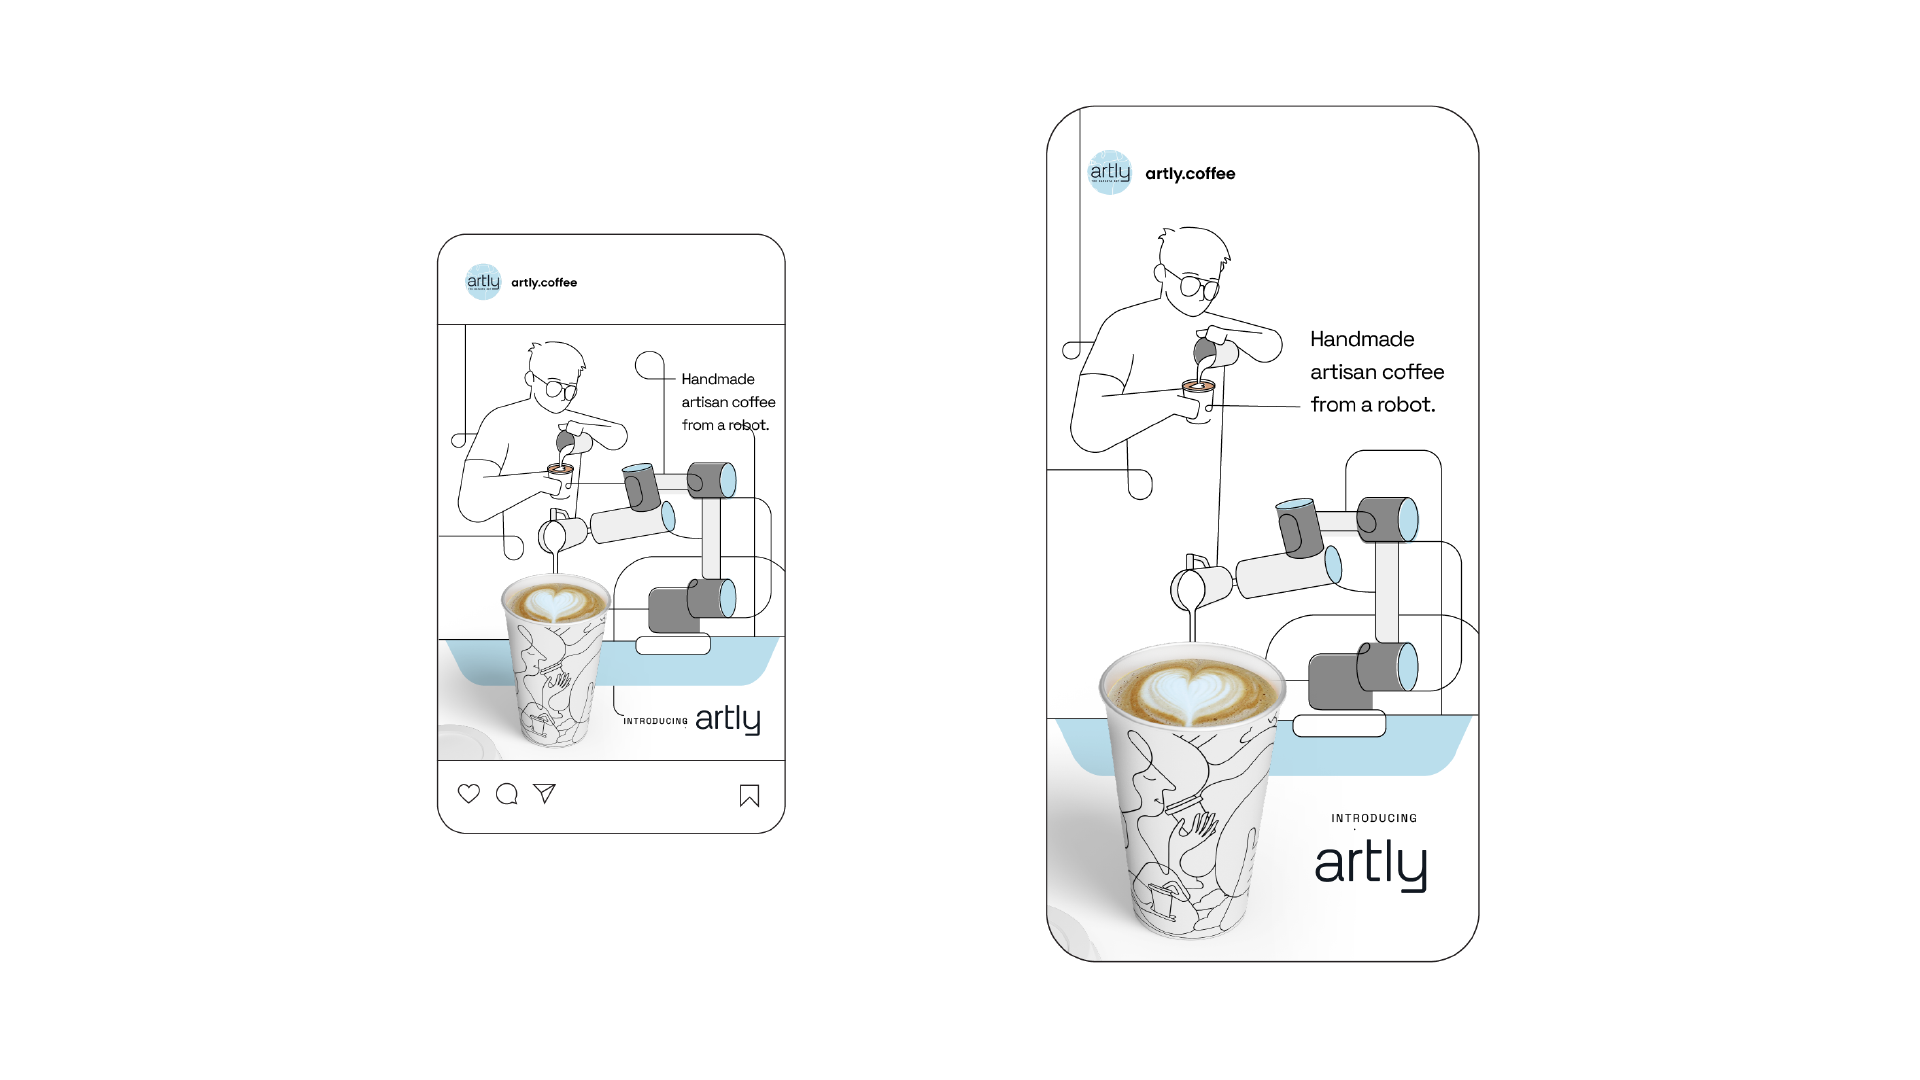 A social media ad we created for Artly shows a line drawing of a man pouring a latte, and that same line connects to a robot arm pouring a latte. The text says, “Handmade artisan coffee from a robot.”